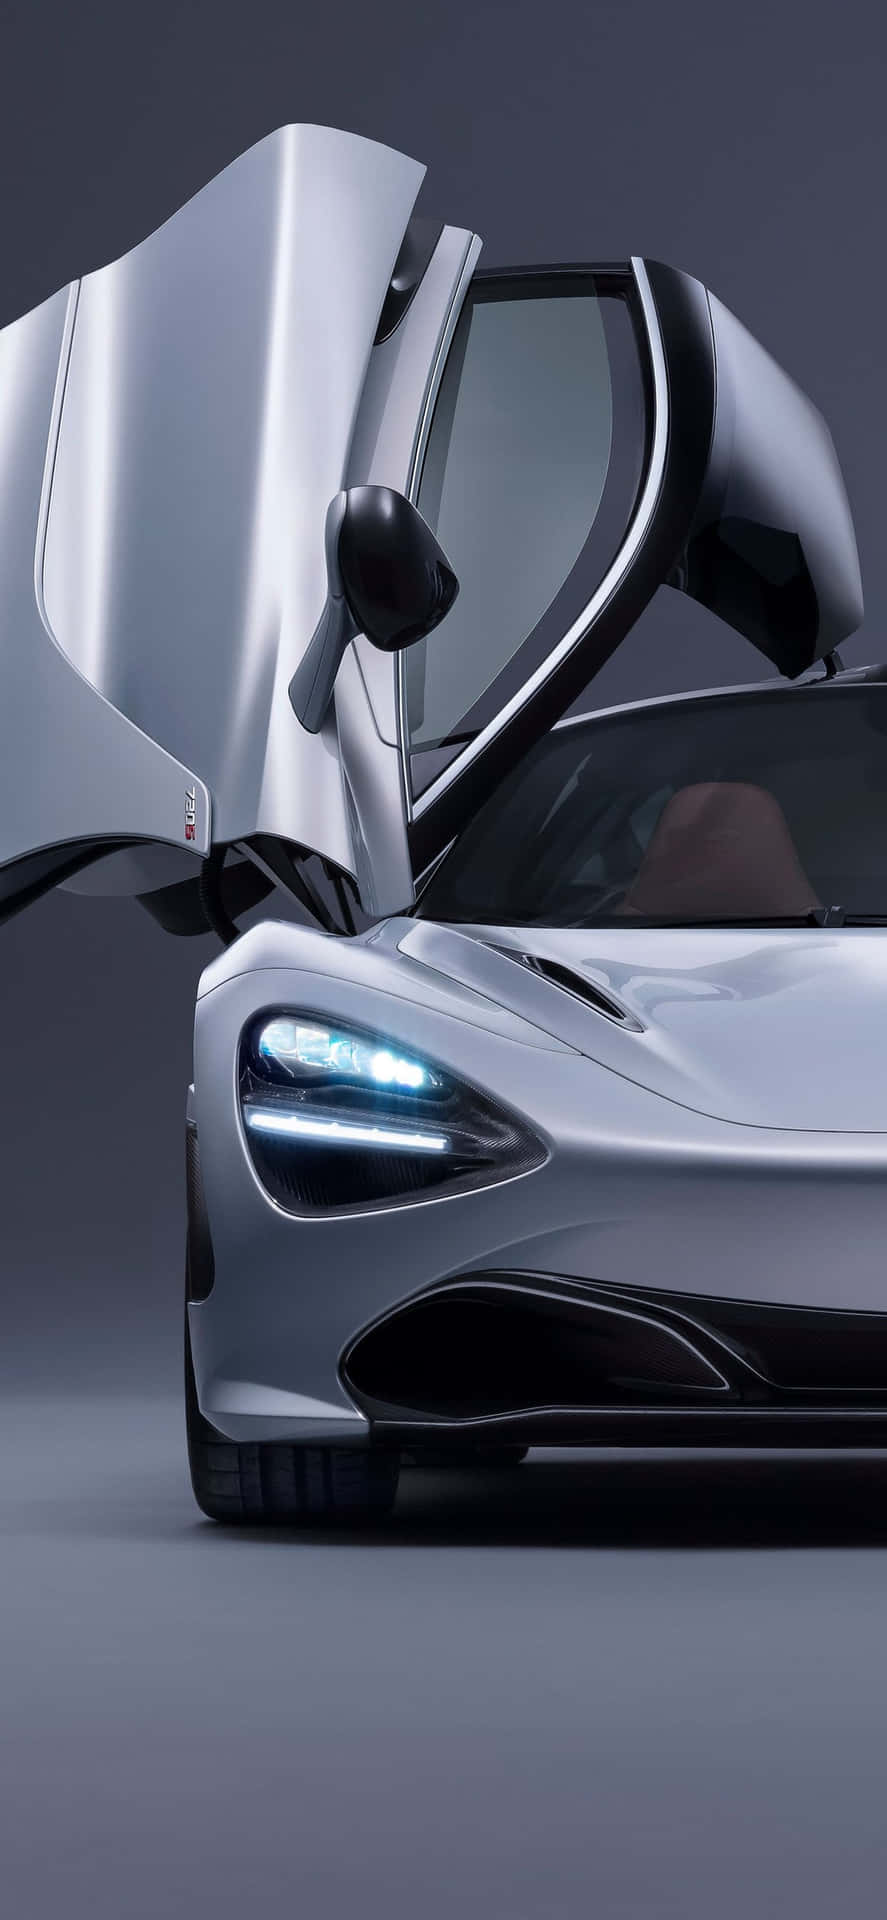 Experience iPhone Xs power and speed with the Mclaren 720s